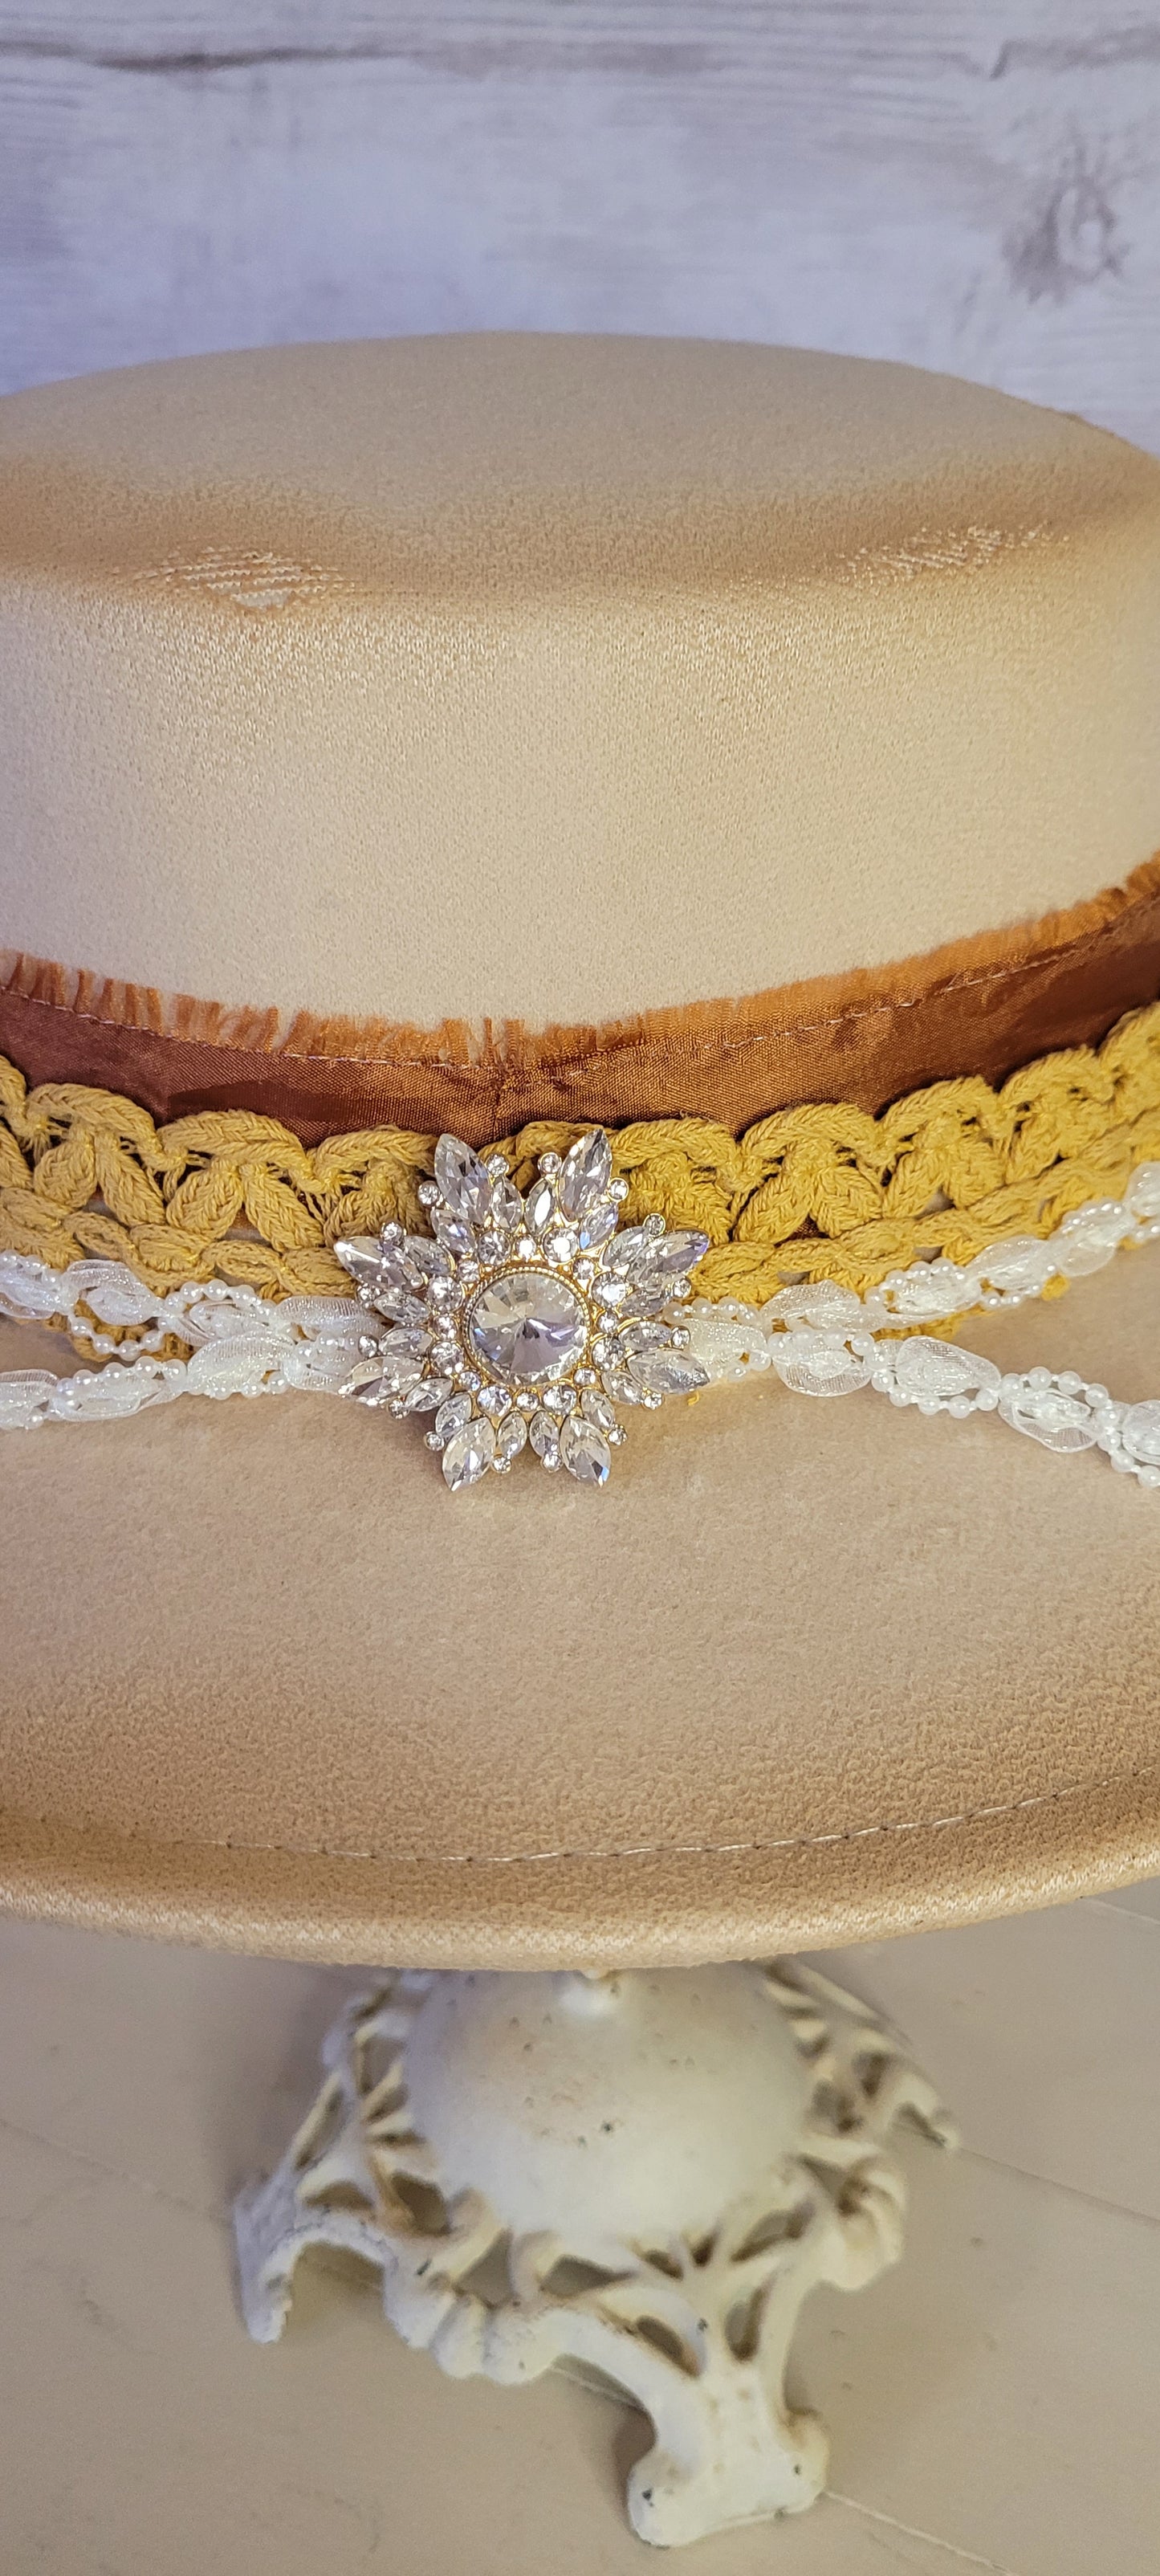 Lace ribbon, frayed lace ribbon, pearl lace ribbon, and rhinestone crystal brooch Felt hat Flat brim 100% polyester Ribbon drawstring for hat size adjustment Head Circumference: 24" Crown Height: 3.5" Brim Length: 13.5" Brim Width: 12.75" Branded & numbered inside crown Custom burned by Kayla